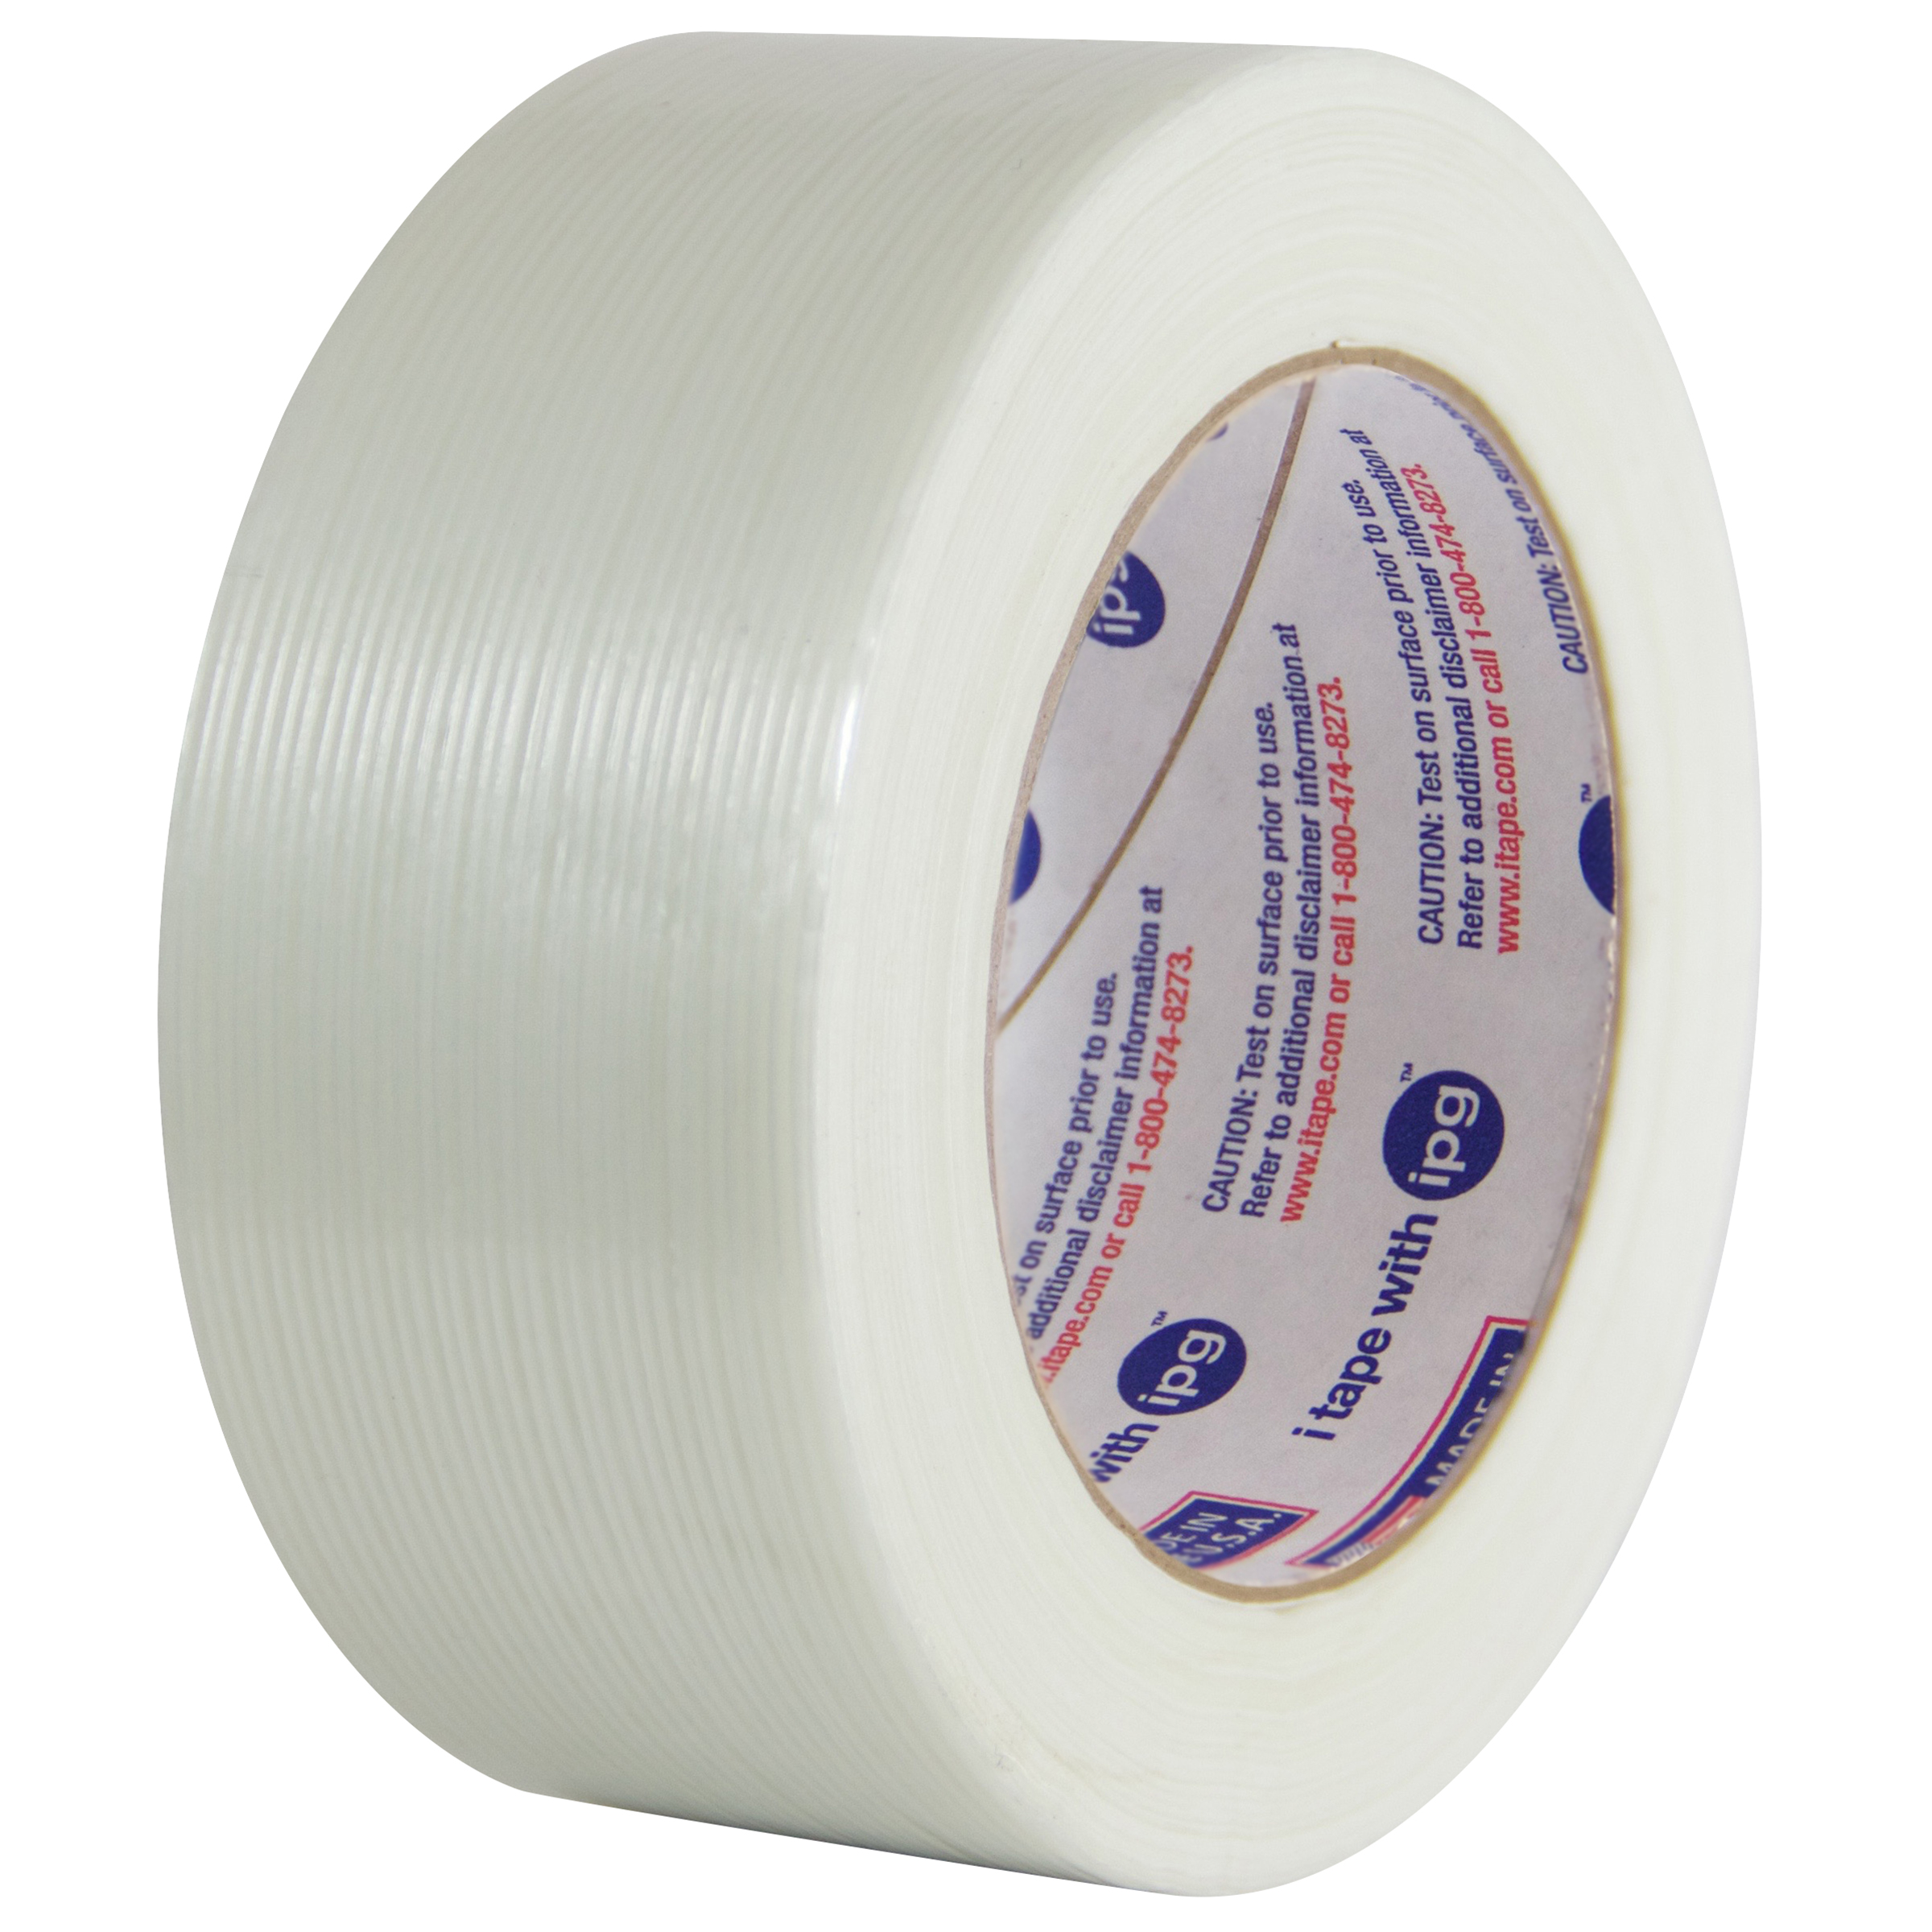 Filament tape VS Duct tape: which one is the right one